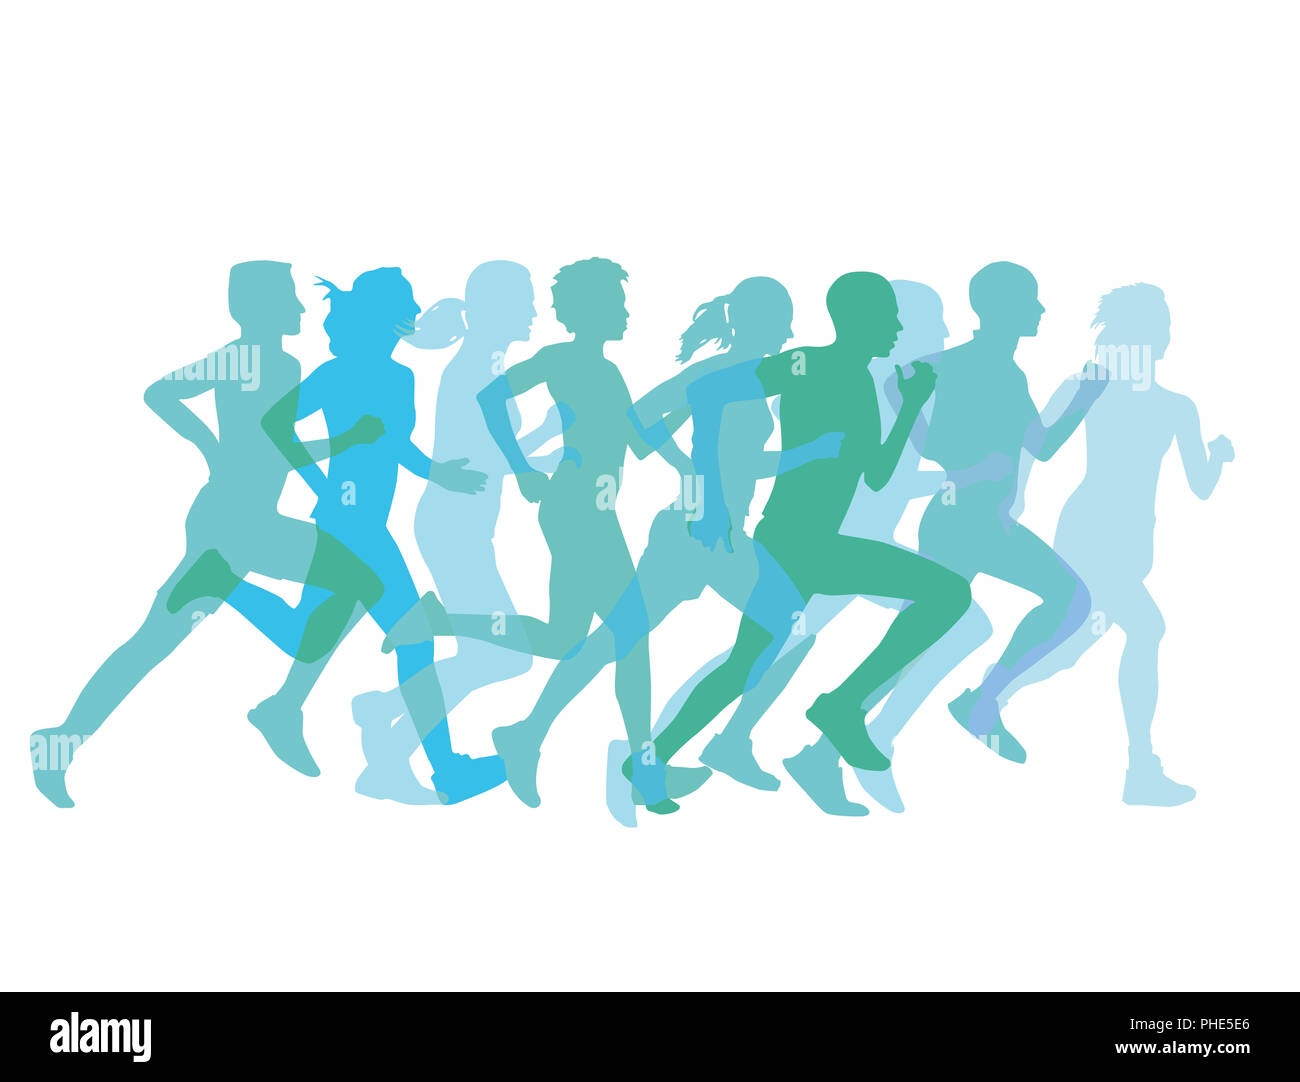 a group of runners together Stock Photo